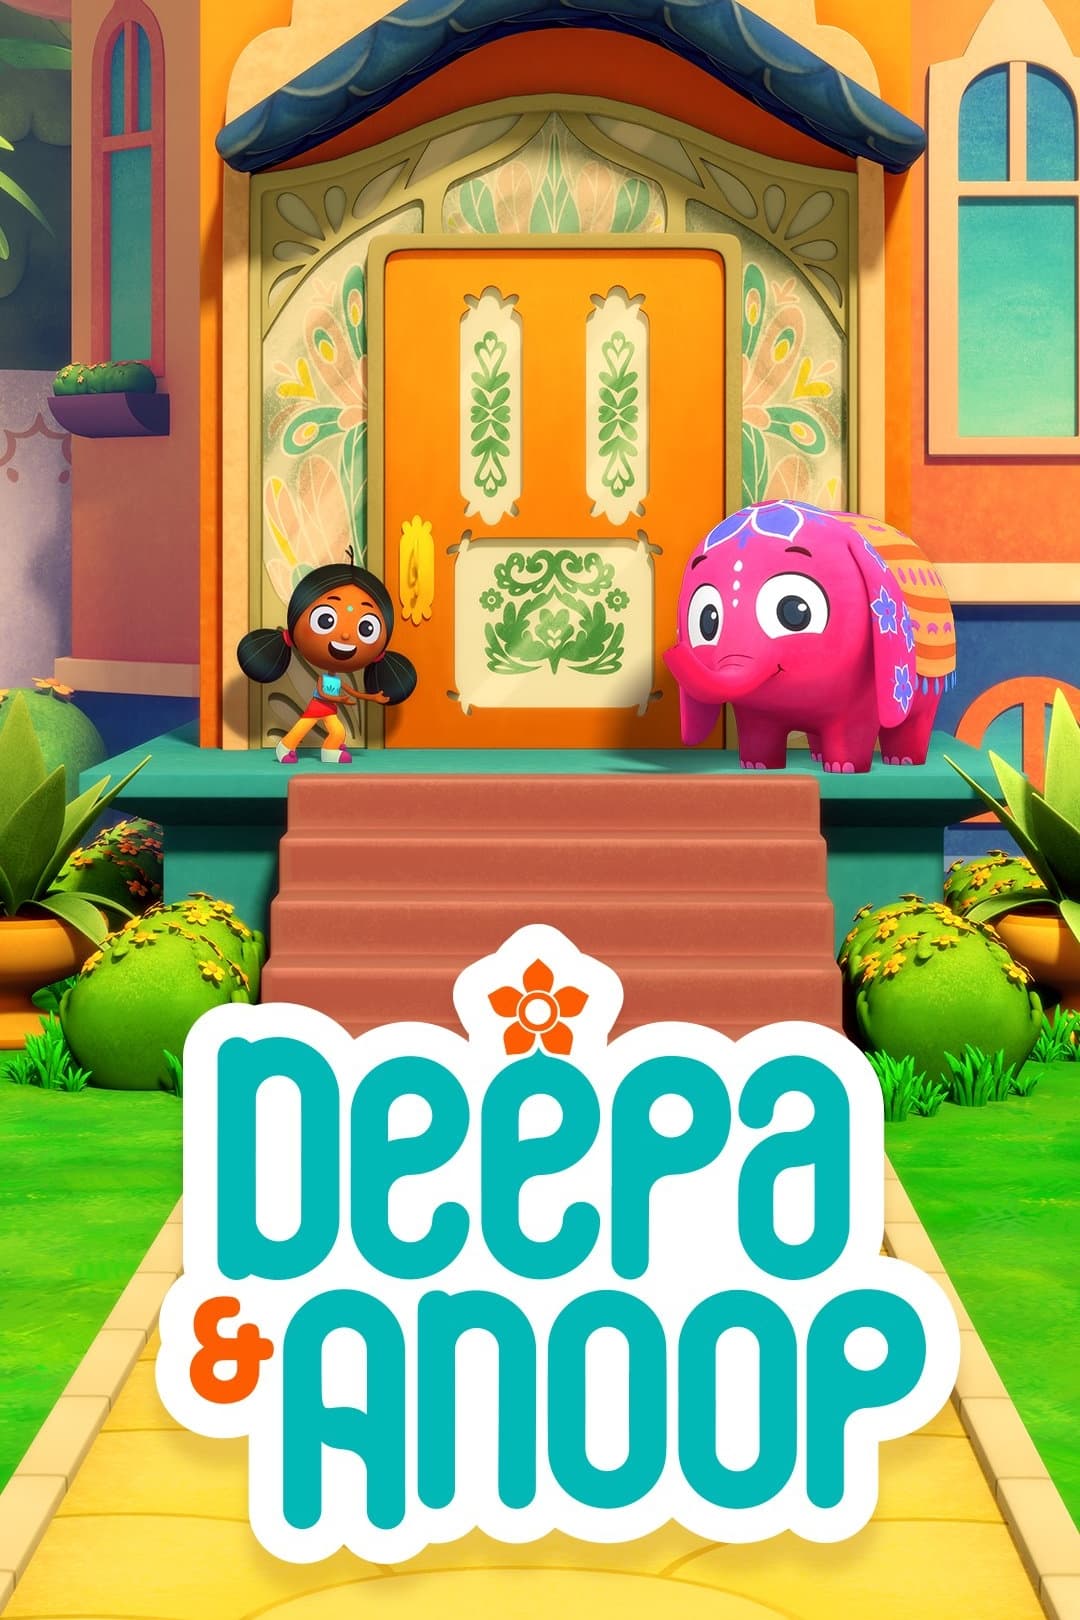 Deepa & Anoop TV Shows About Educational